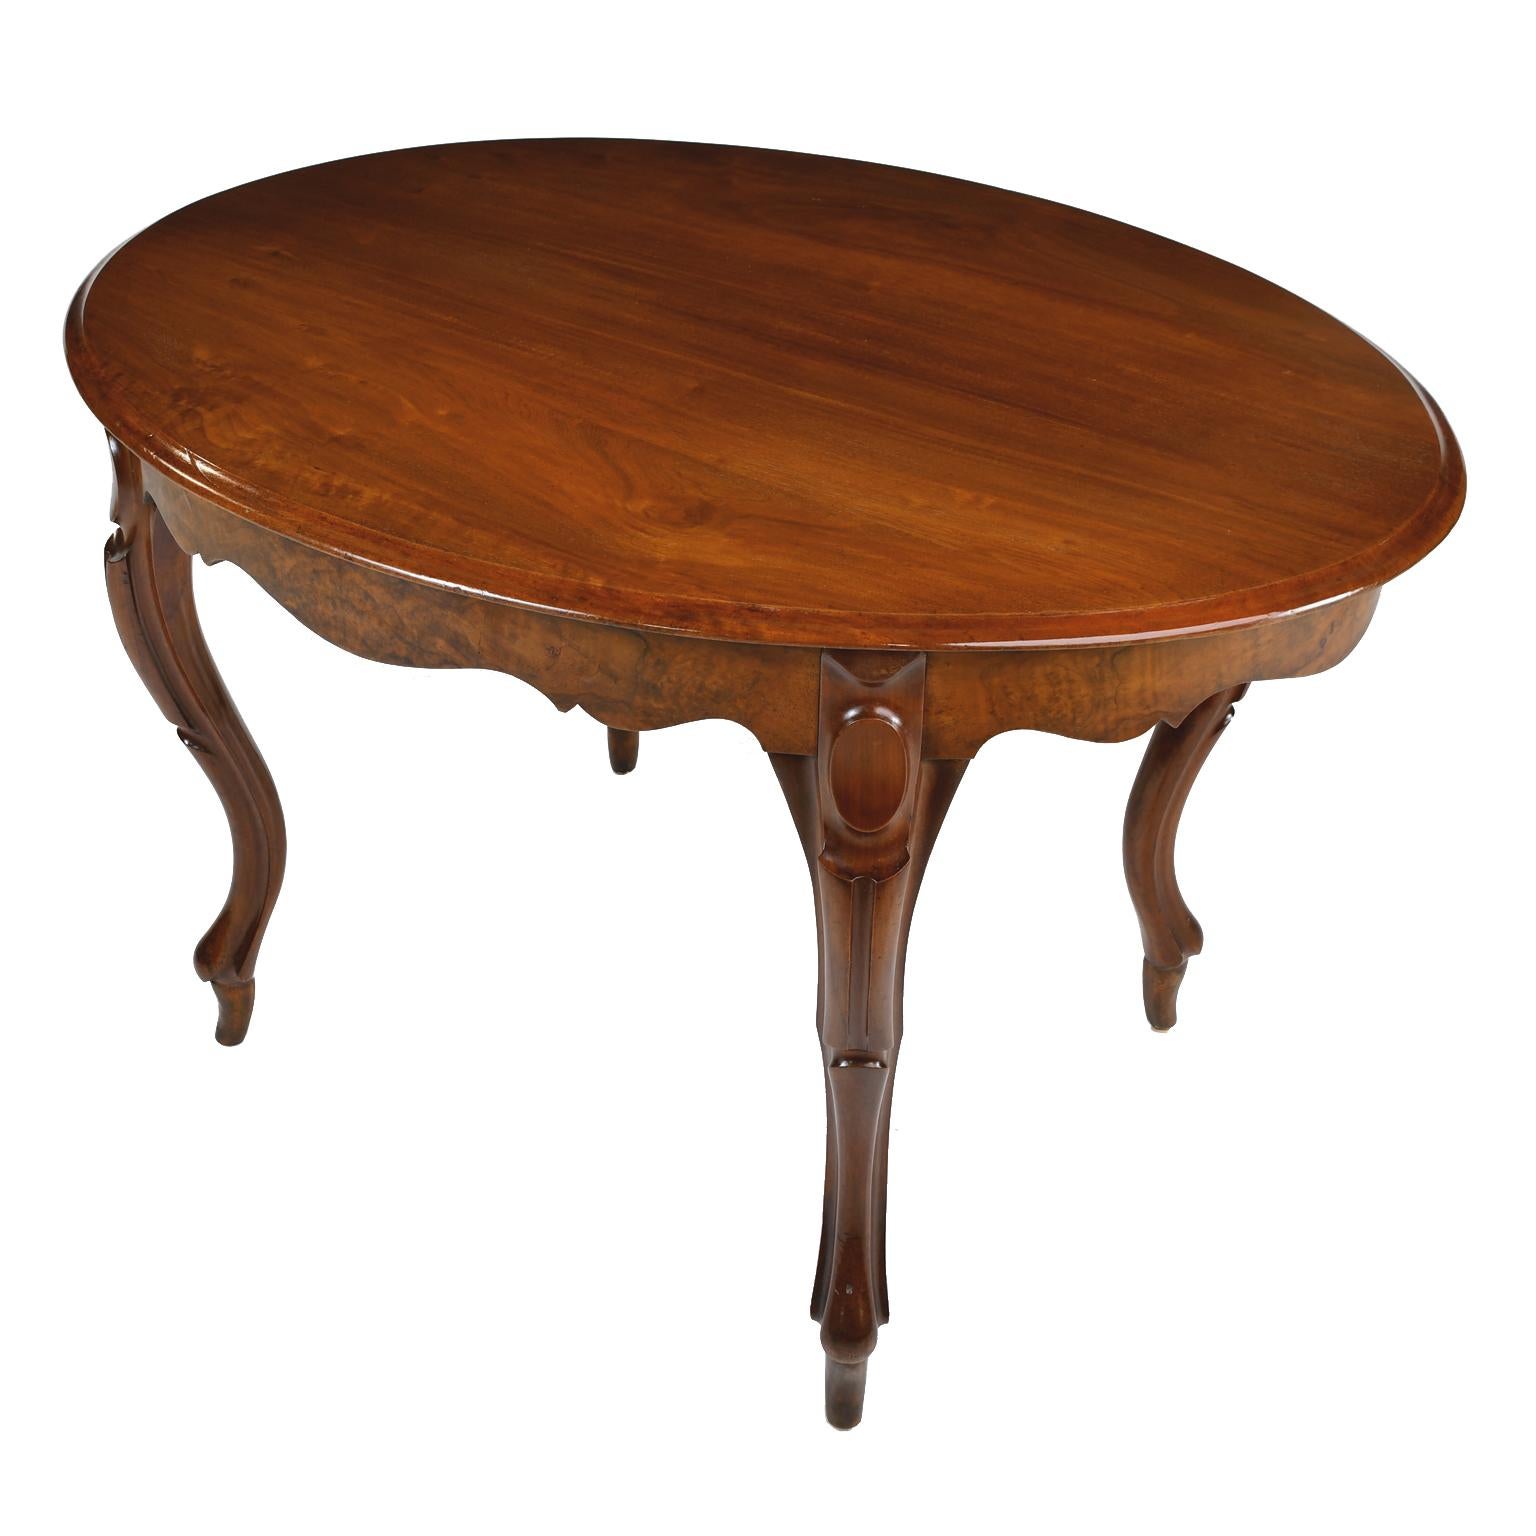 A fine Louis Philippe salon table with oval top and scalloped apron resting on four graceful carved cabriole legs. Top and legs are made of solid mahogany, with the apron made of burl walnut. France, circa 1840. Makes a handsome small dining table,